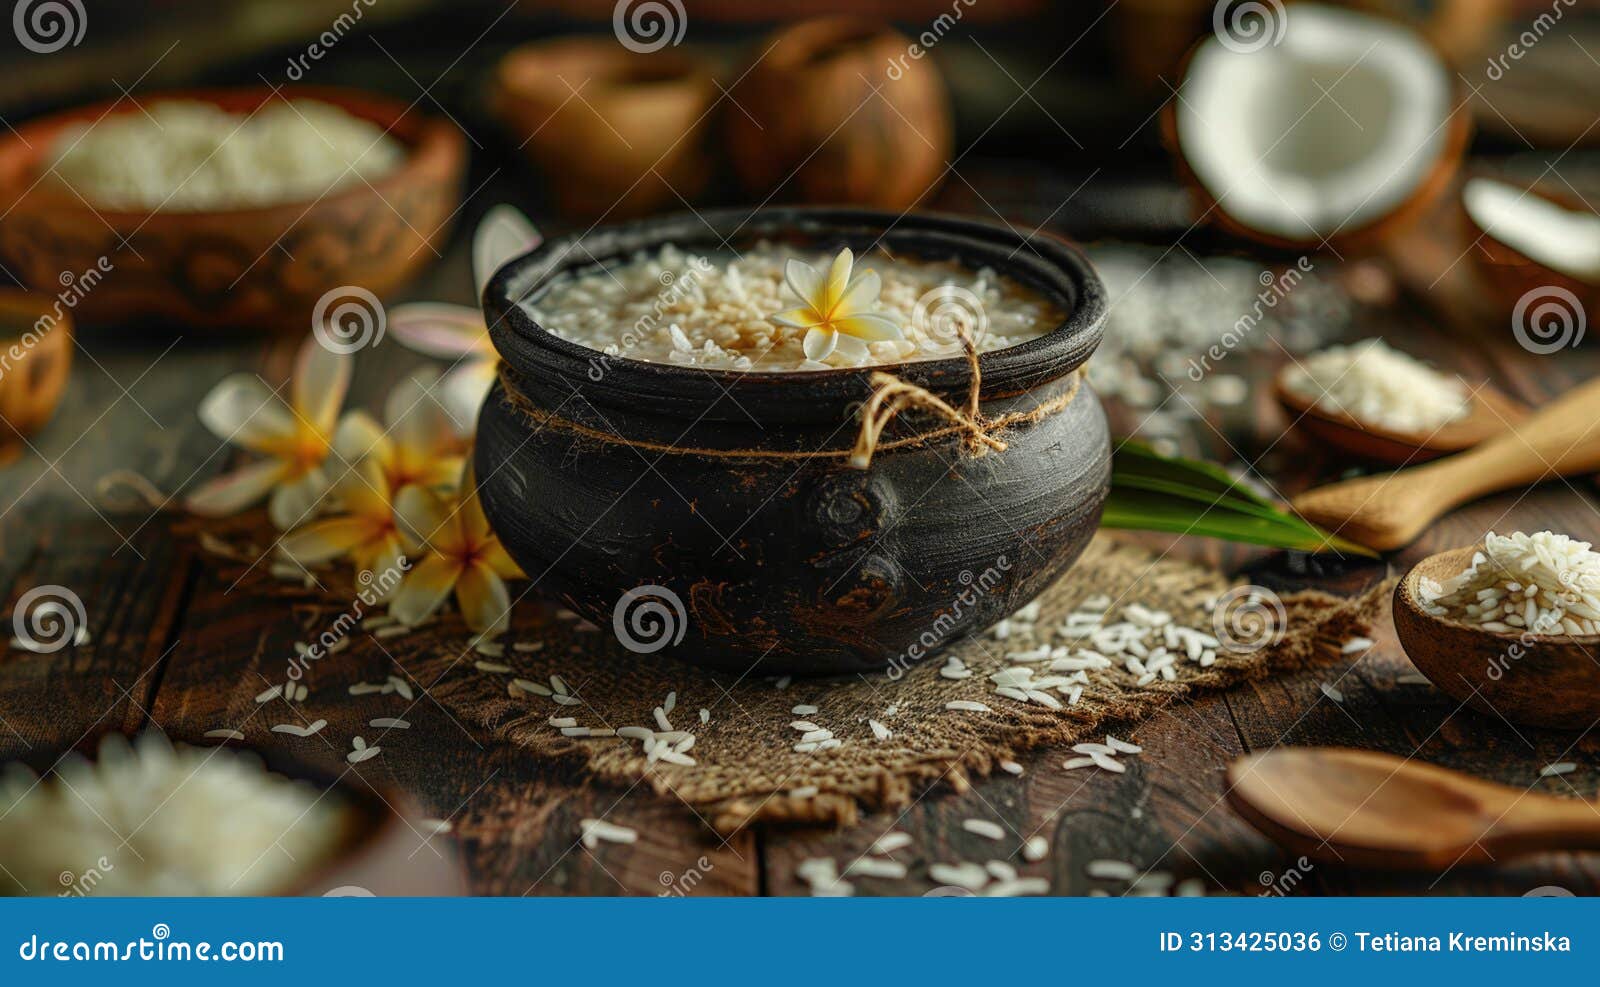 clay pot with kiribath on a rustic table, surrounded by coconut milk, rice, and frangipani flowers for sinhalese new